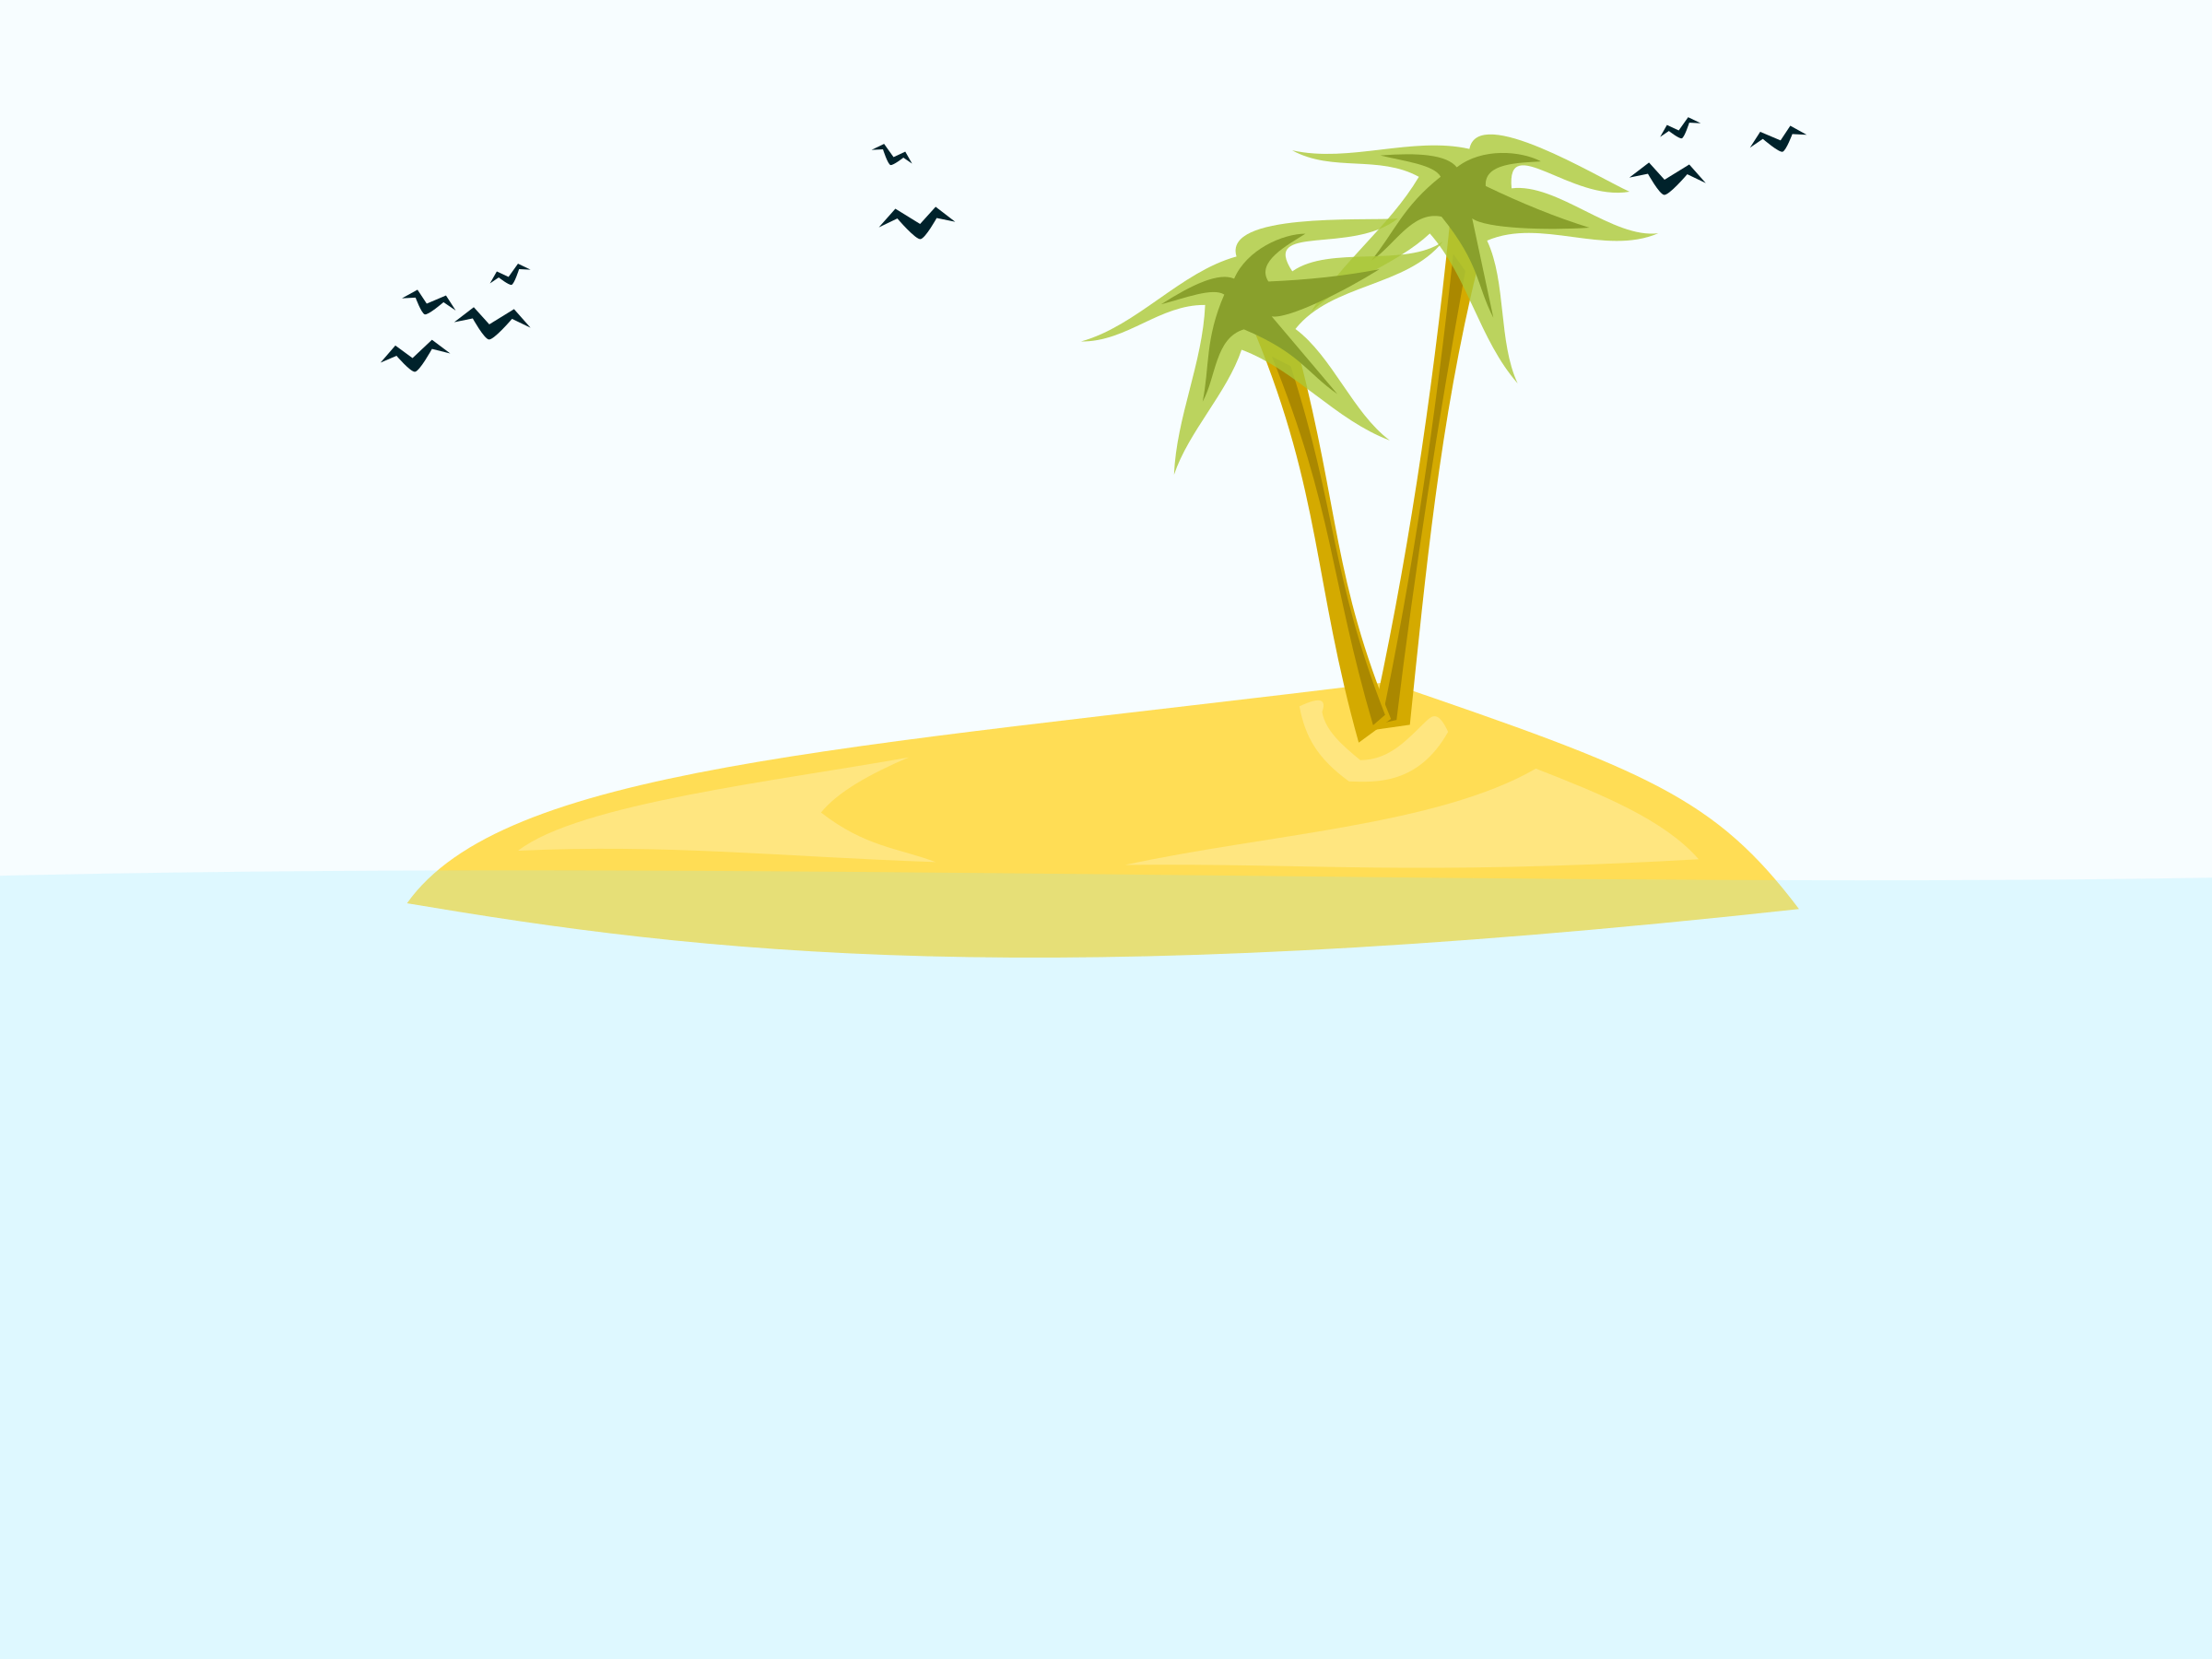 Island clipart small island. Tropical big image png